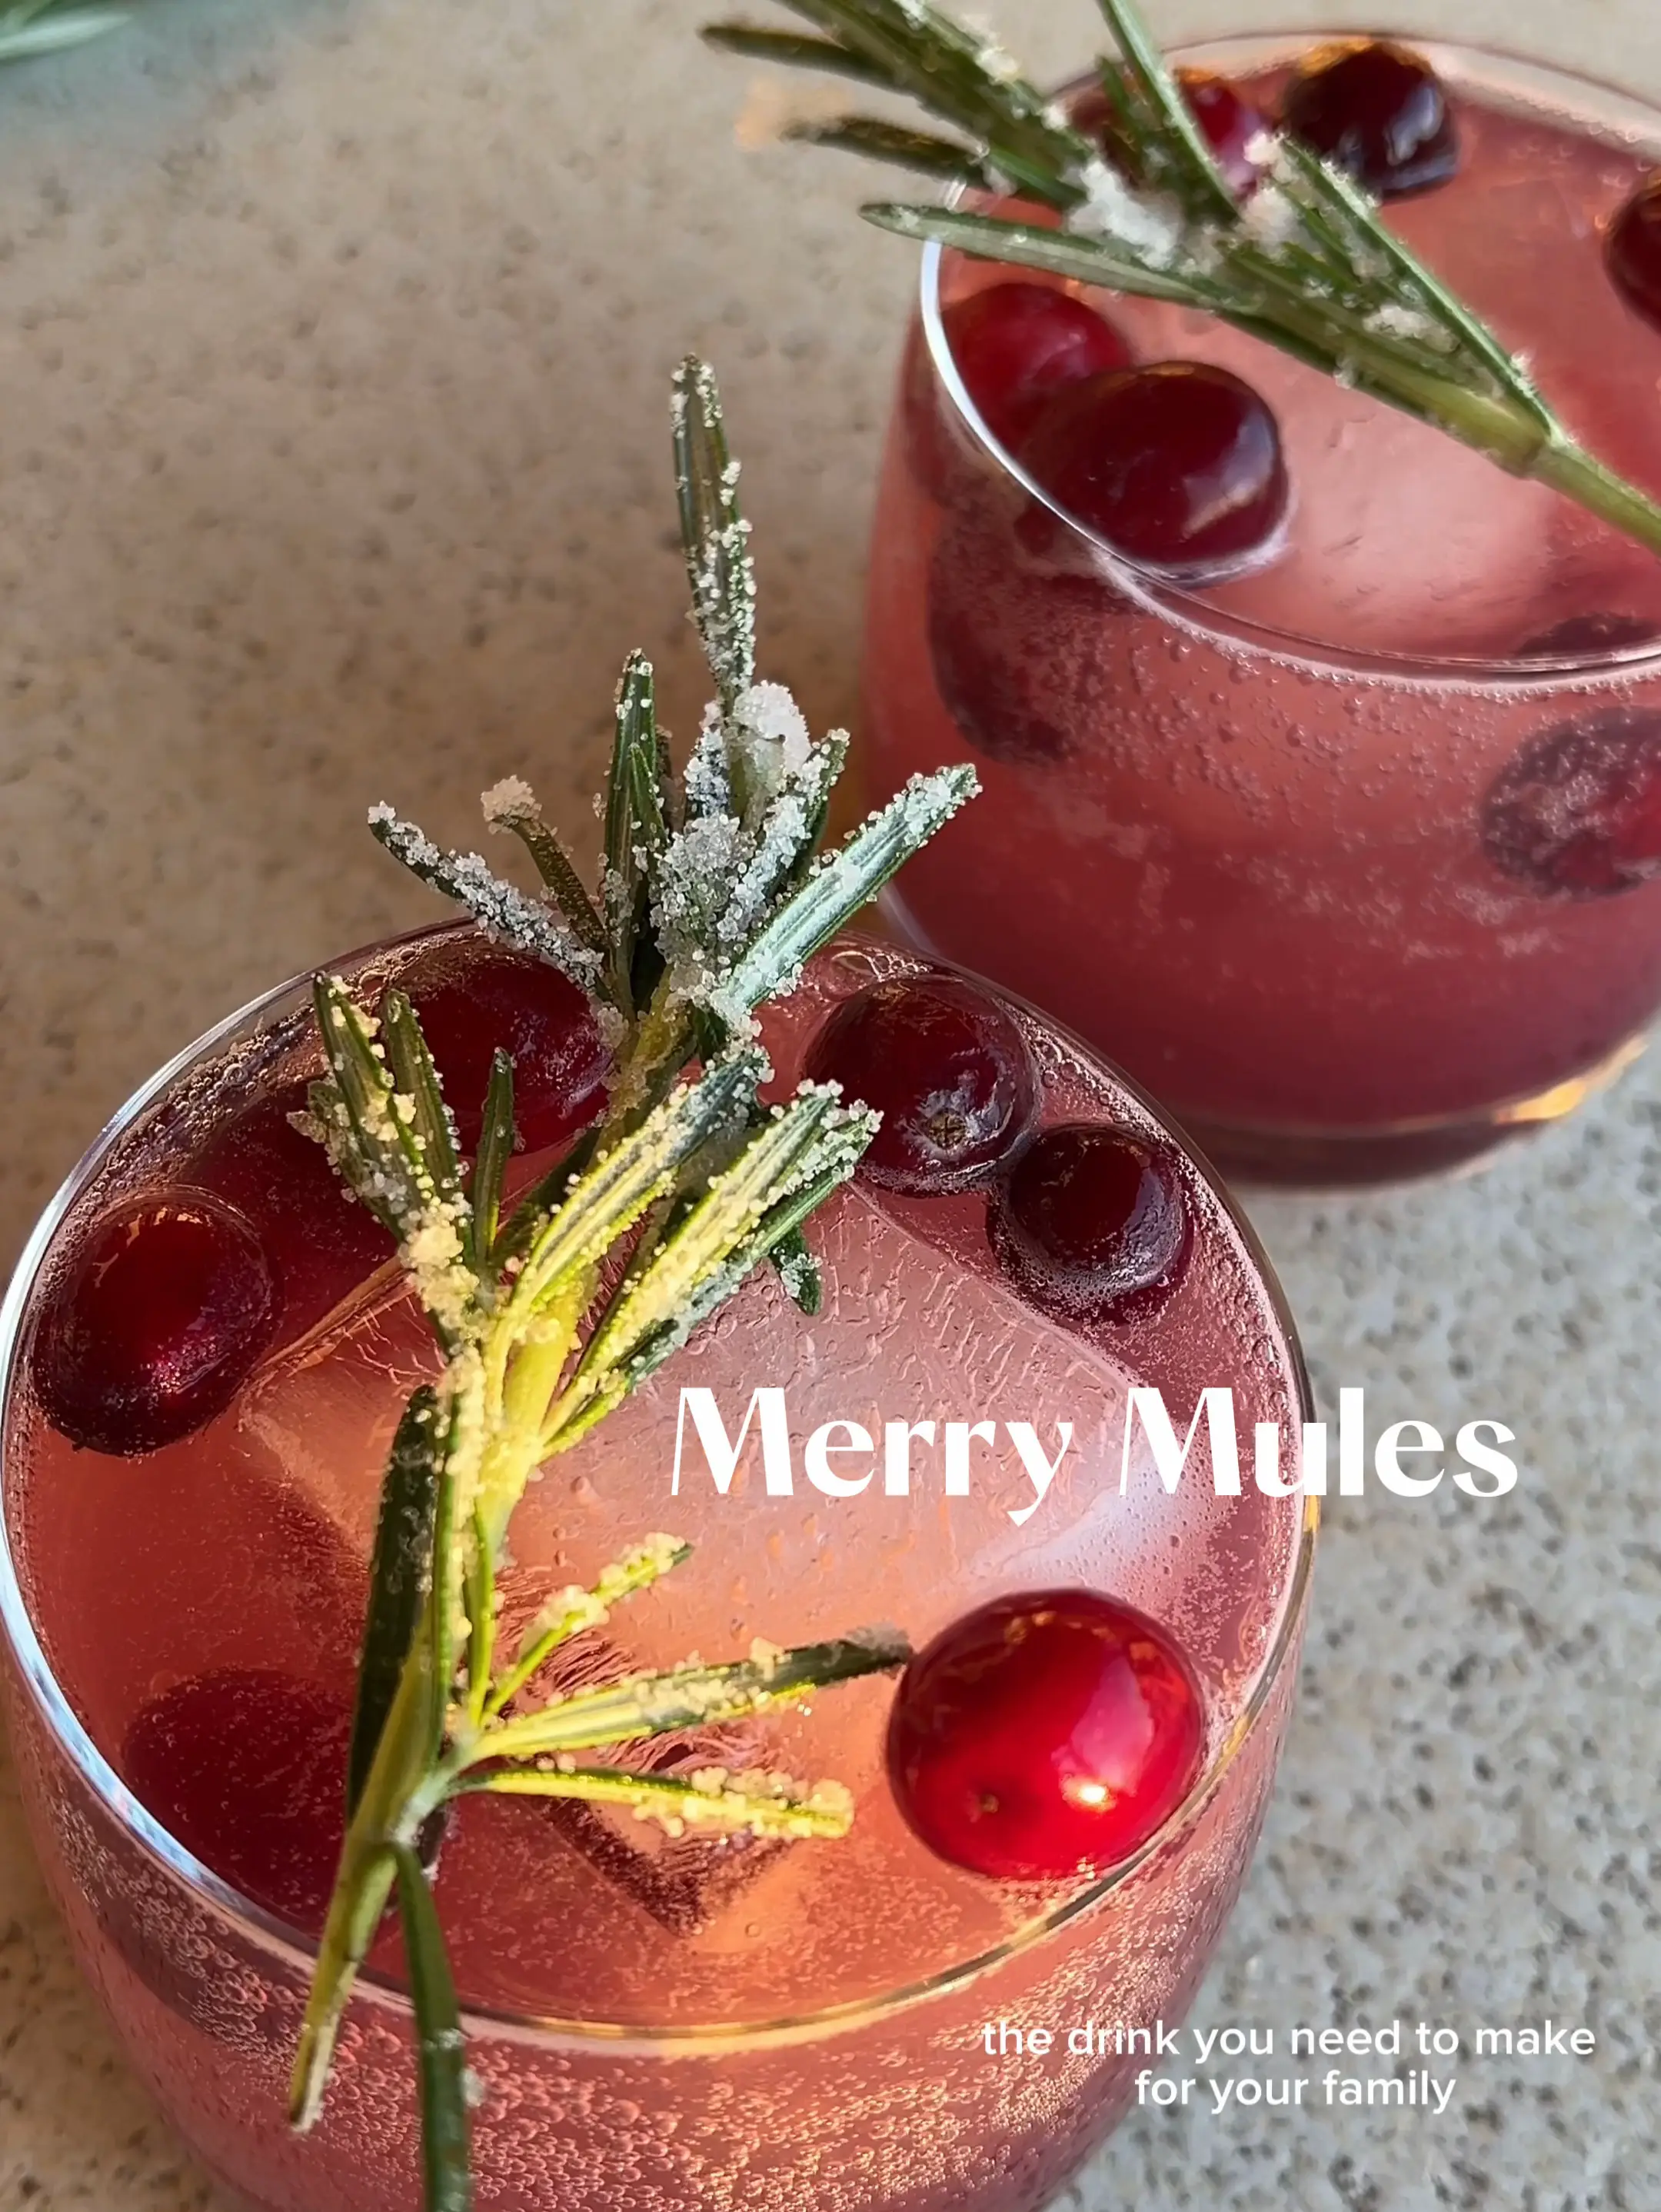 Merry Mules's images